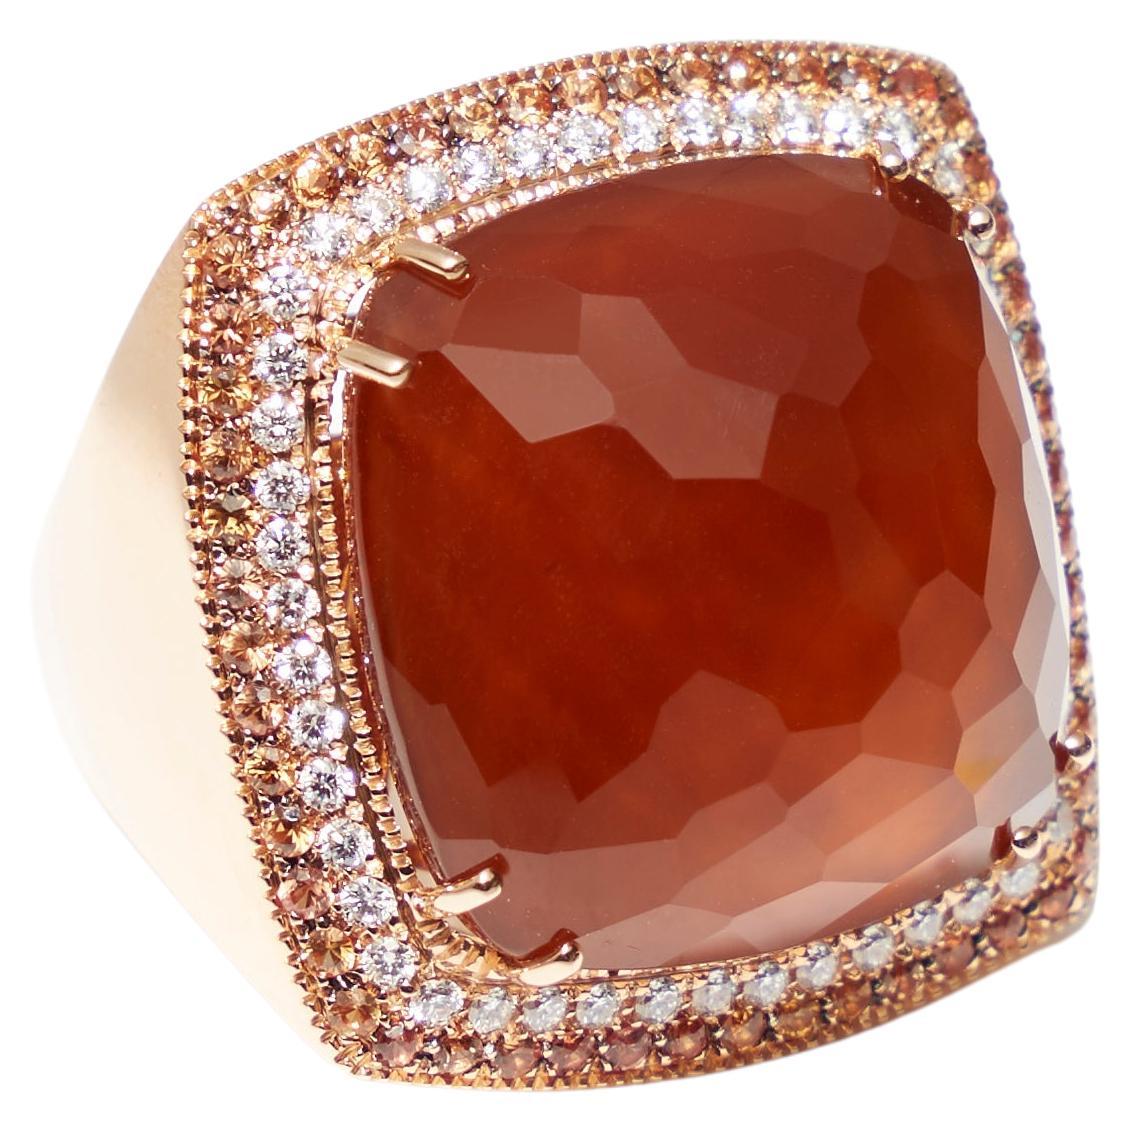 18 karat rose gold ring with layered smokey quartz, agate and mother of pearl as a center stone, set with 0.71 carat orange sapphires and 0.51ct diamonds.

Made in Italy and by craftsman that create jewelry that is modern, sophisticated, and bold.